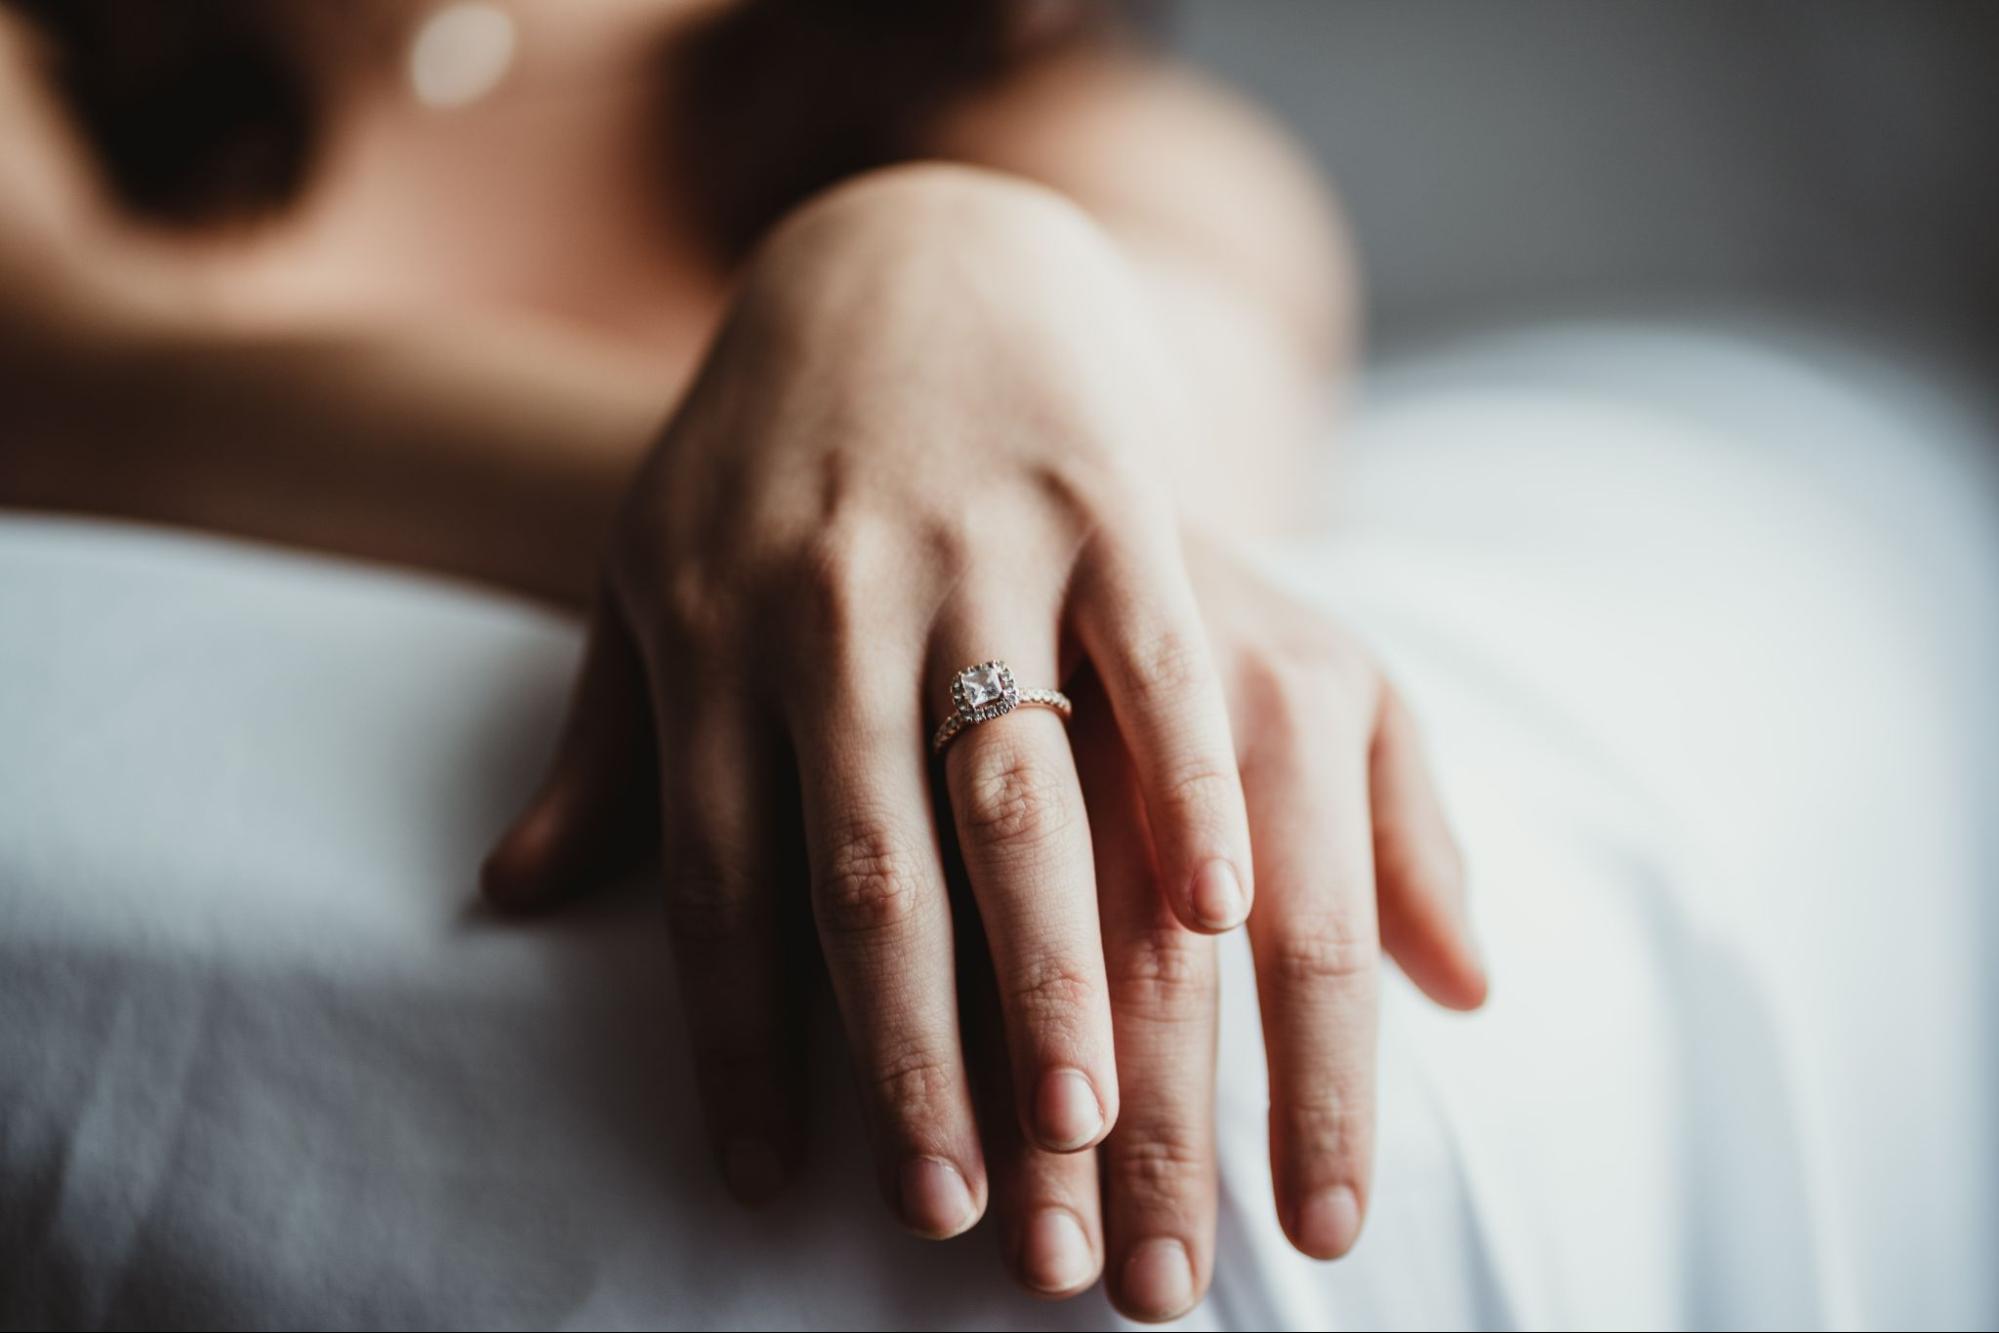 A woman’s hand featuring a princess-cut diamond engagement ring sits on top of a man’s hand.